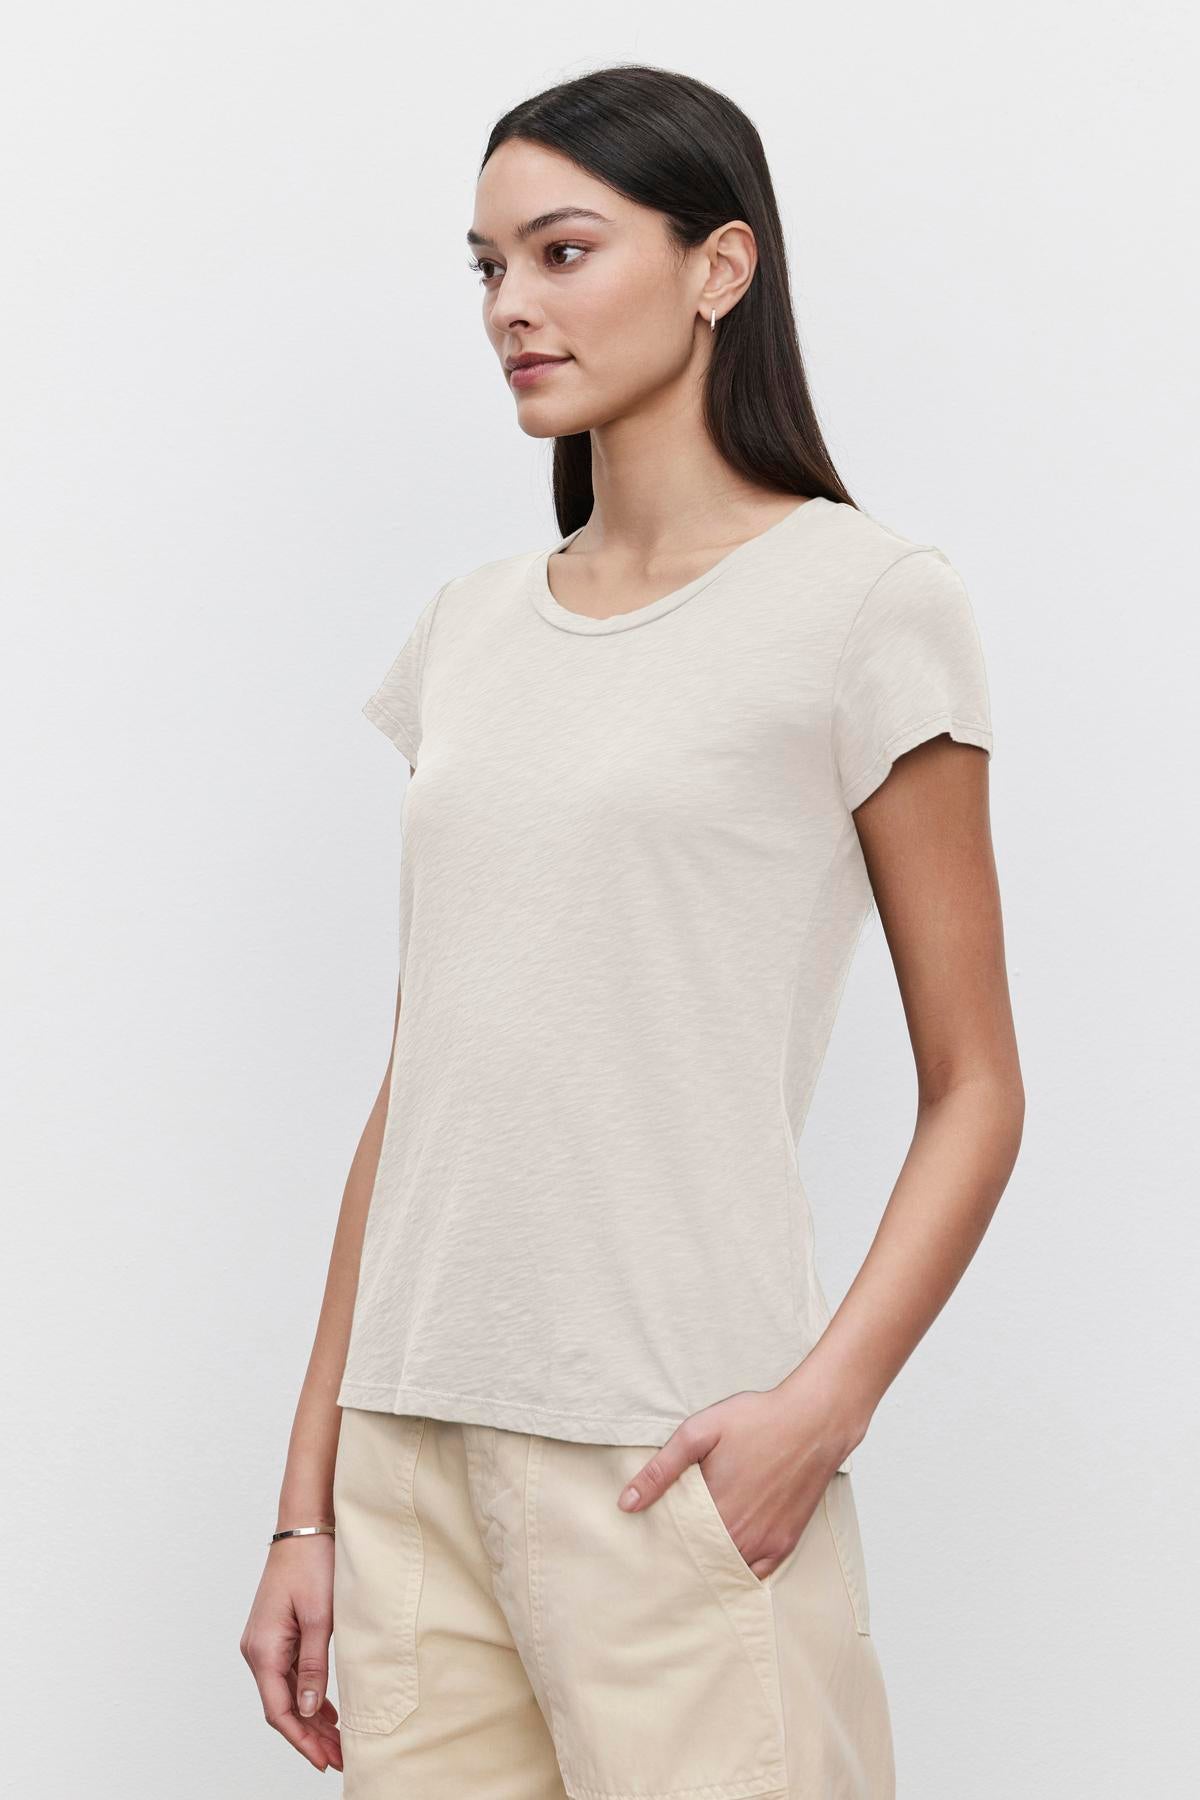   A woman with long dark hair is standing against a plain background, wearing a light beige ODELIA TEE made from premium cotton by Velvet by Graham & Spencer and light-colored pants, with her hand in her pocket. 